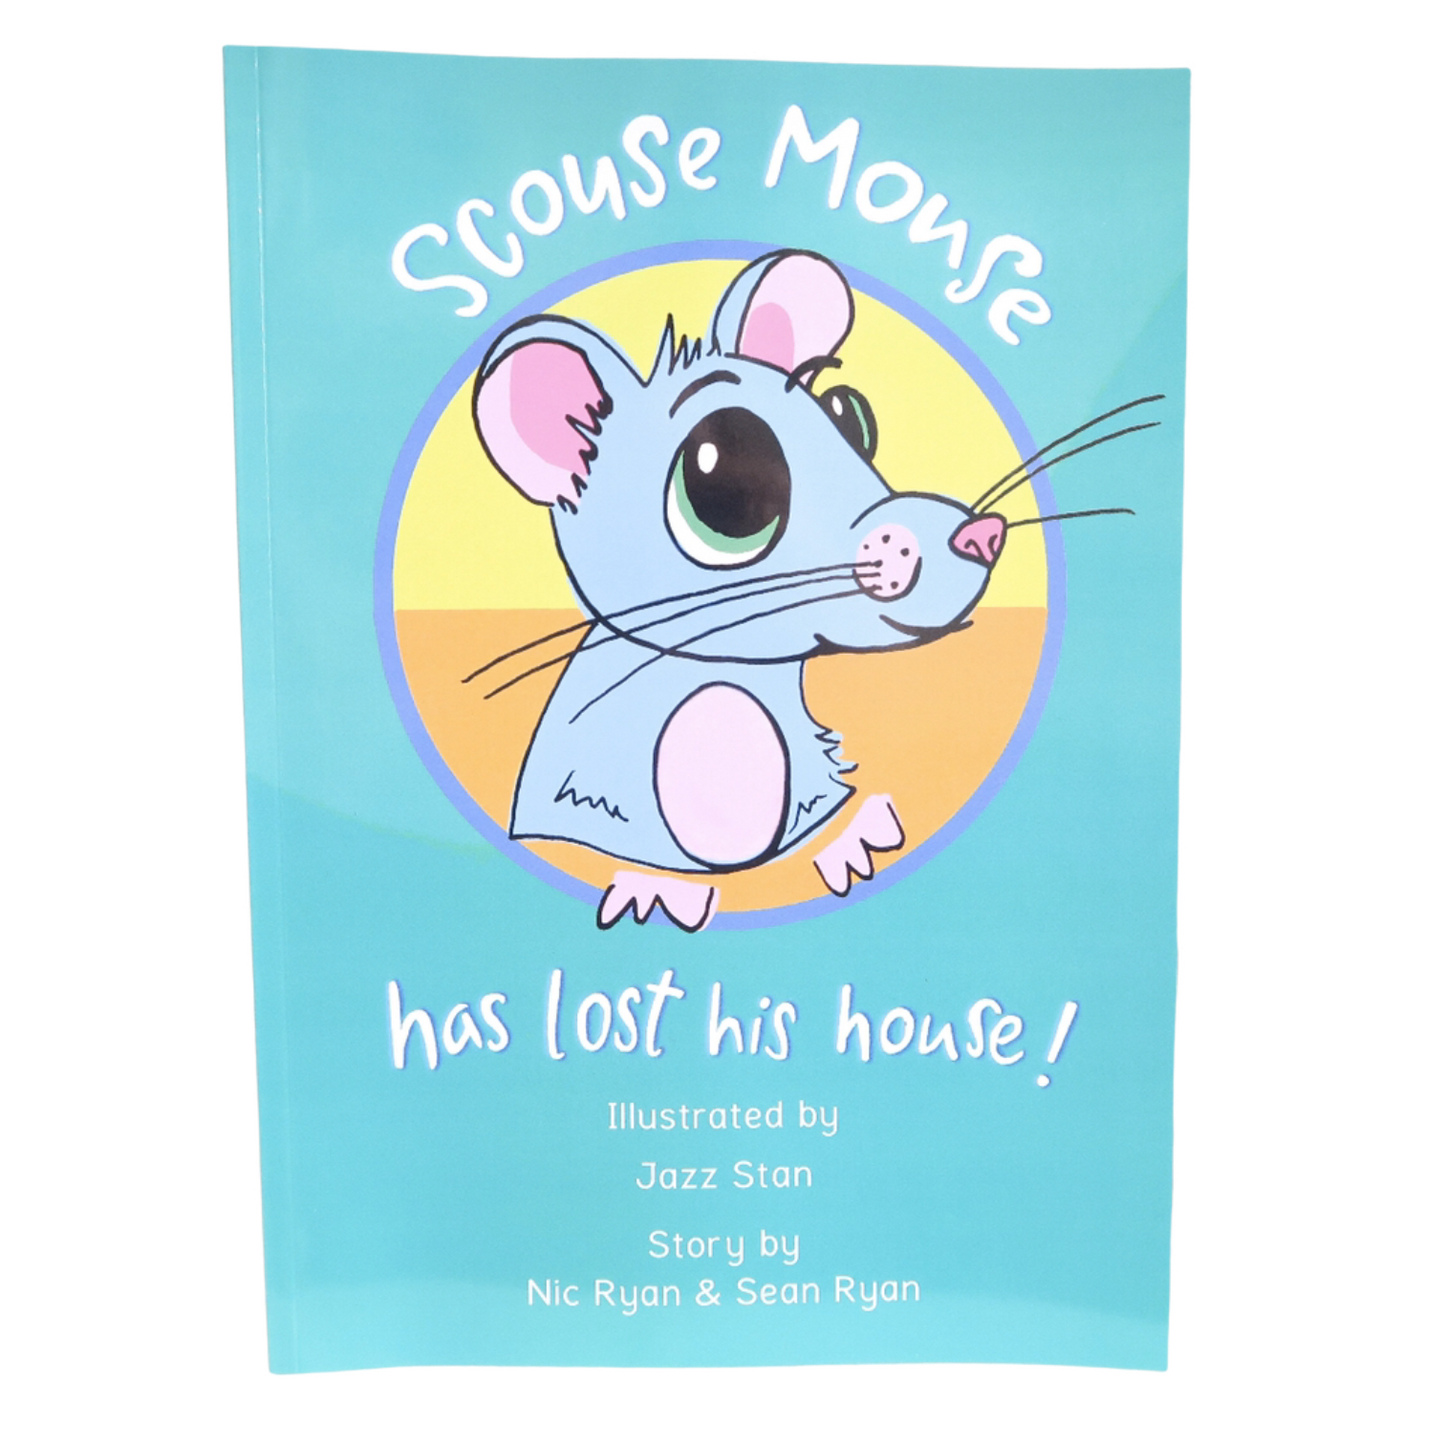 Scouse Mouse has lost his house - Children's Book